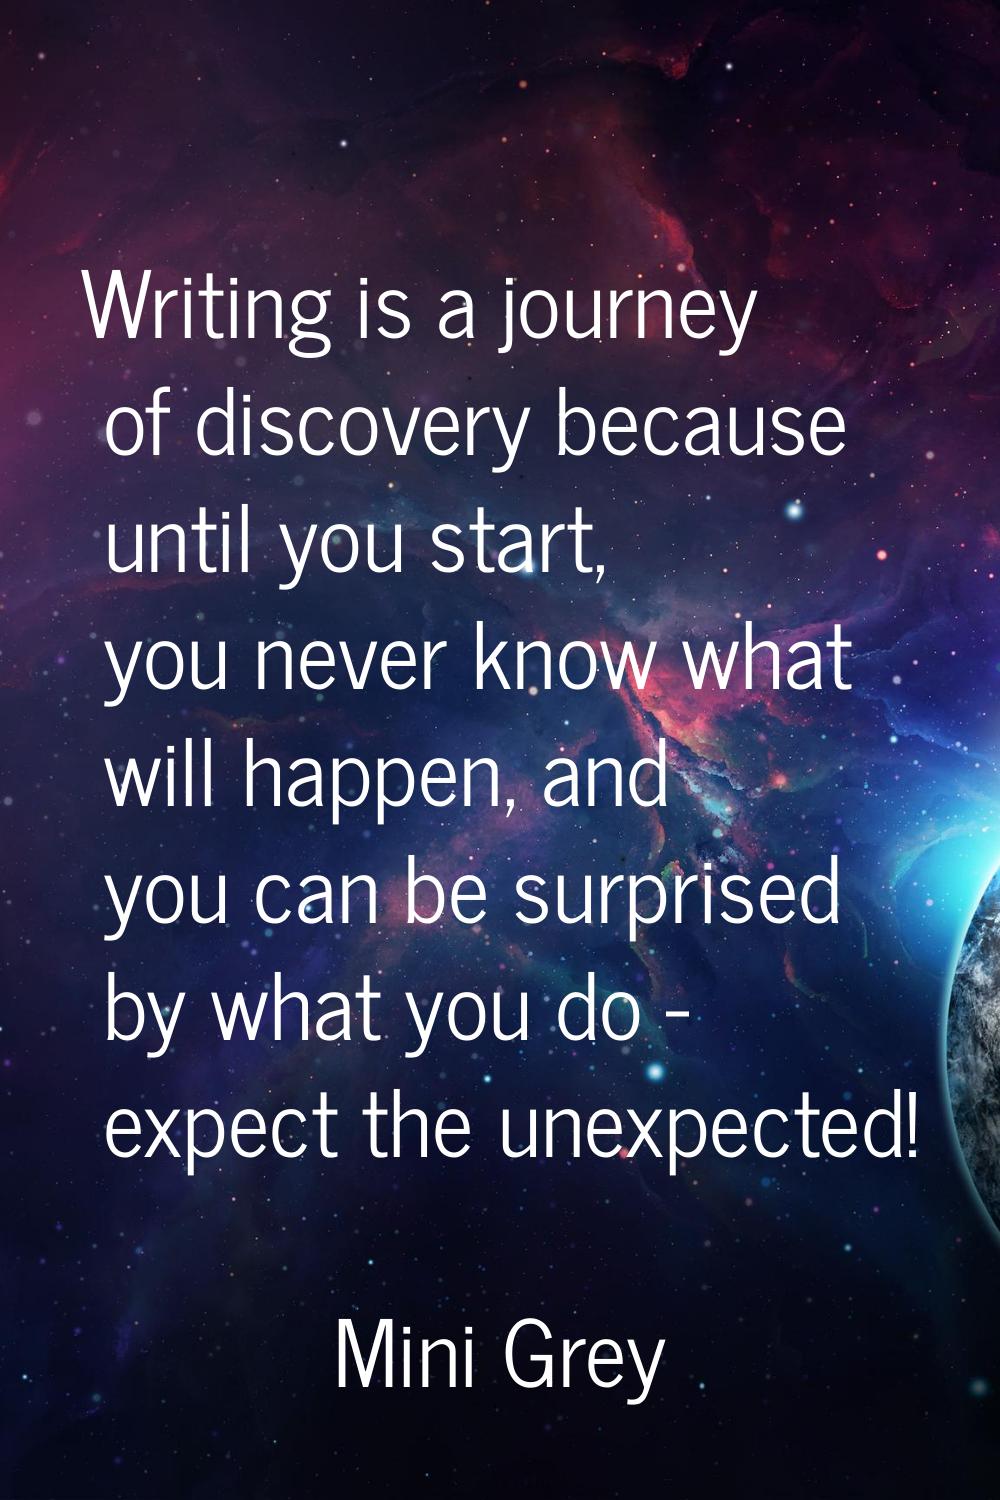 Writing is a journey of discovery because until you start, you never know what will happen, and you